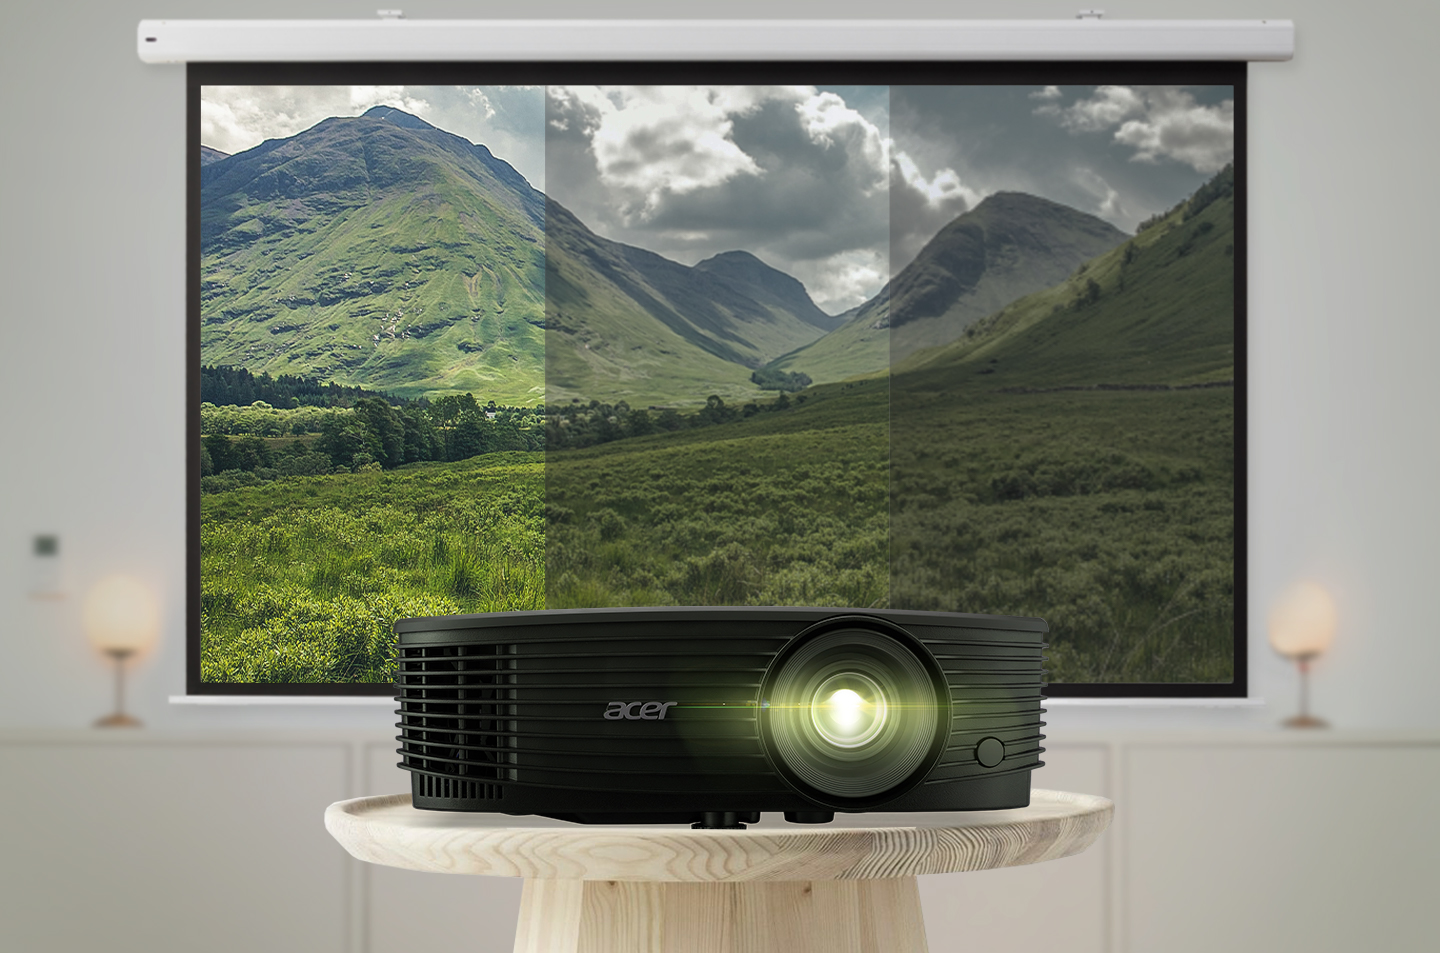  A black Acer projector sits on a table in a home theater displaying a large image of mountains on a projection screen.